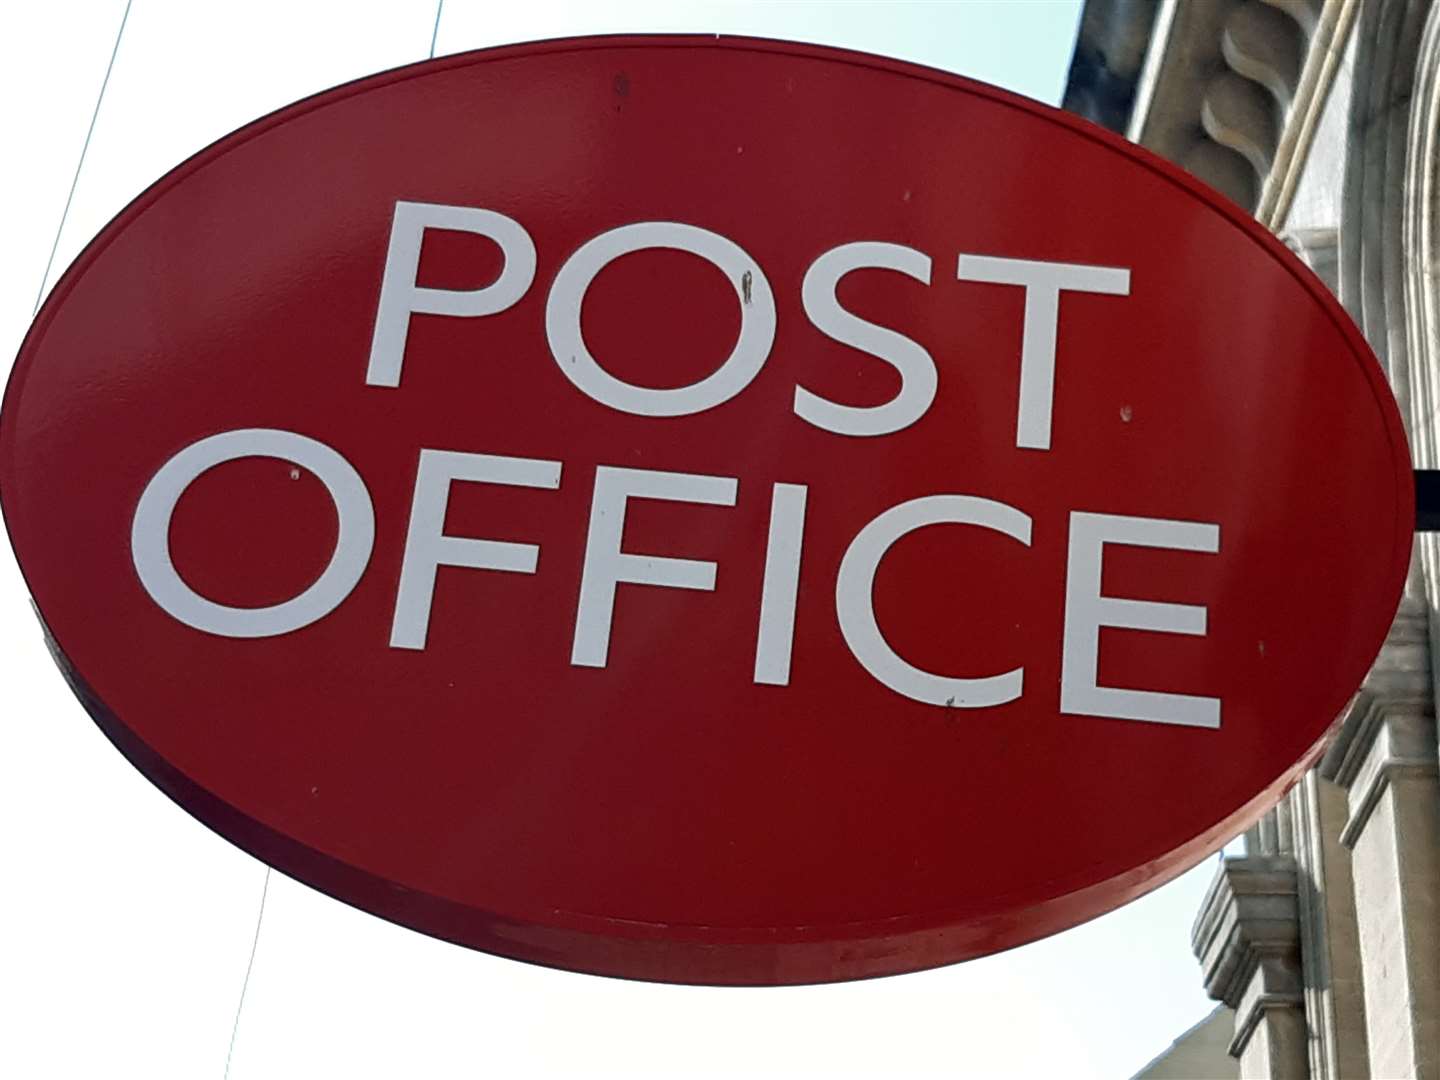 The Post Office says it expects a last-minute rush to deposit paper notes